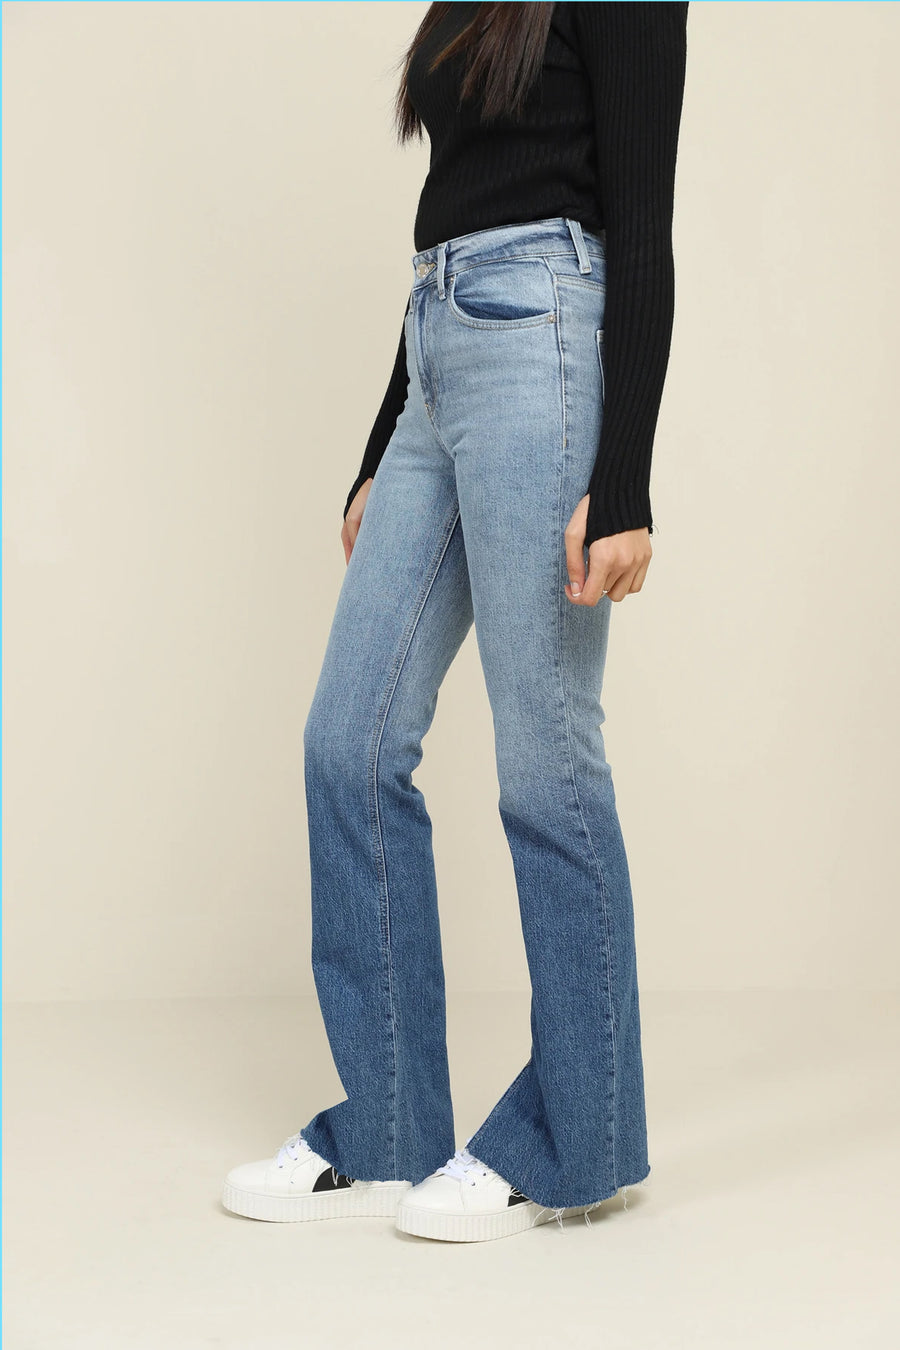 2-Toned Mia Bell bottoms